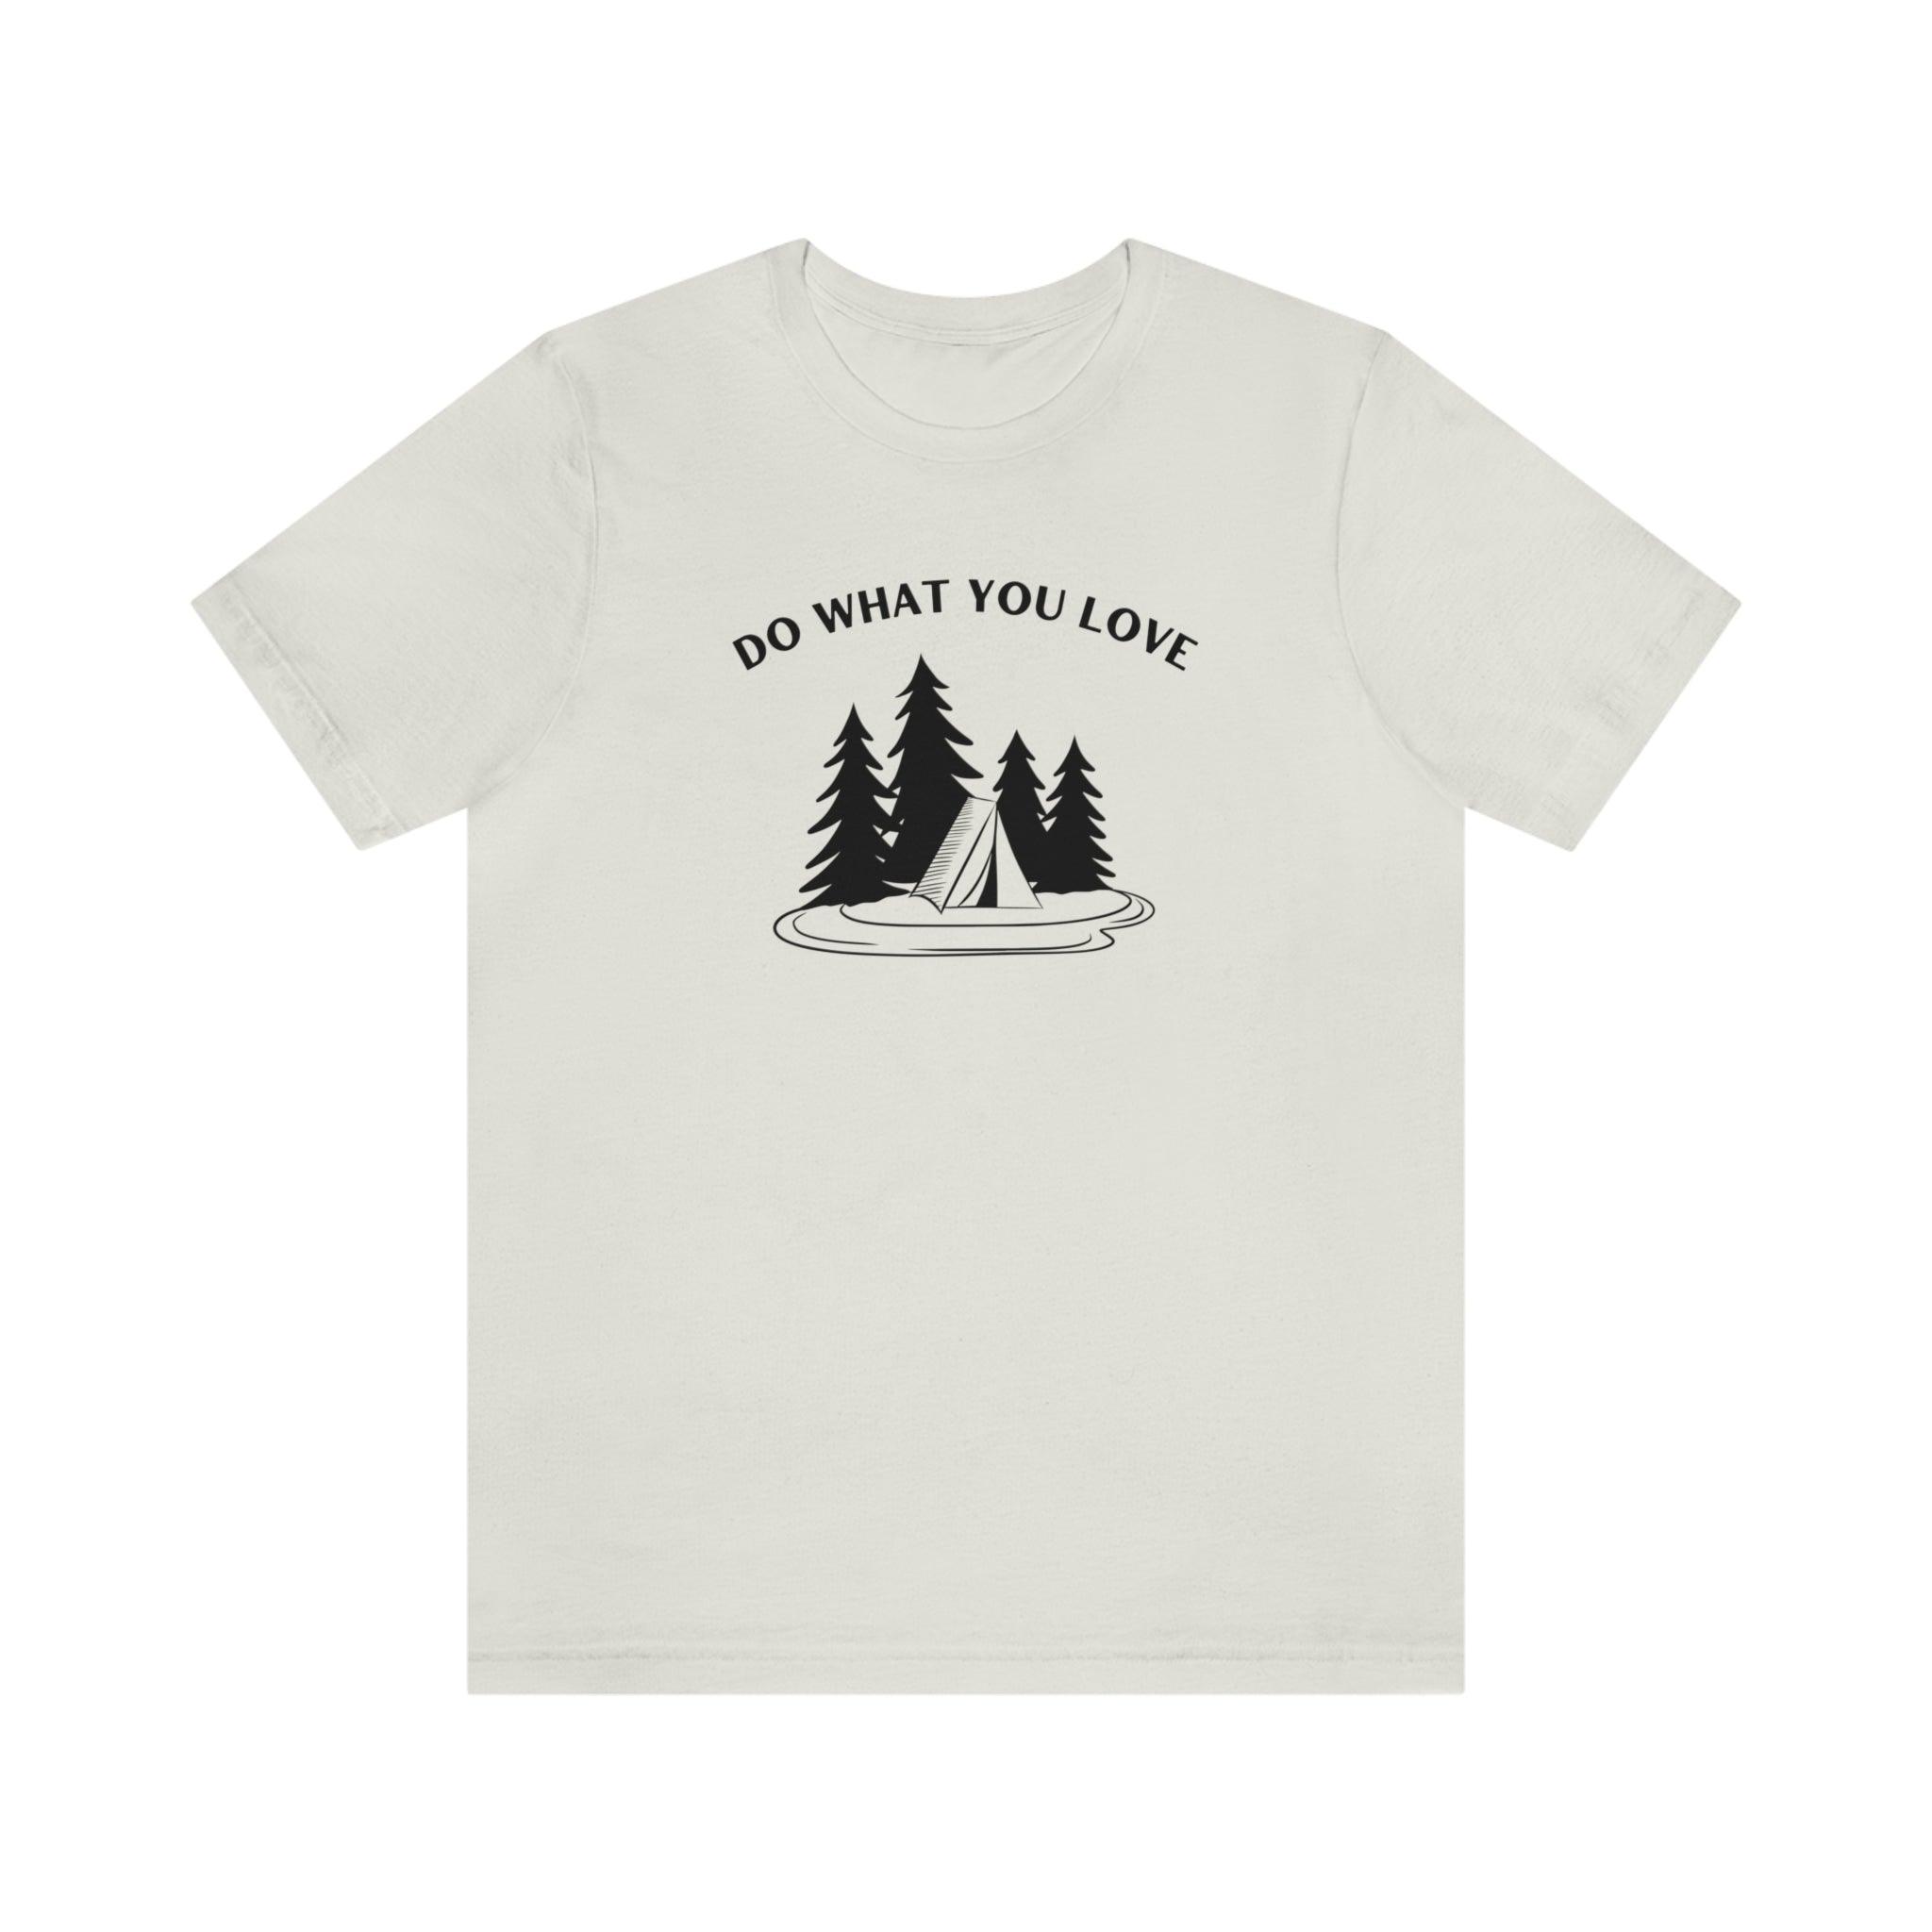 "Do What You Love" Camping 100% Cotton Jersey Short Sleeve T-Shirt - Melomys